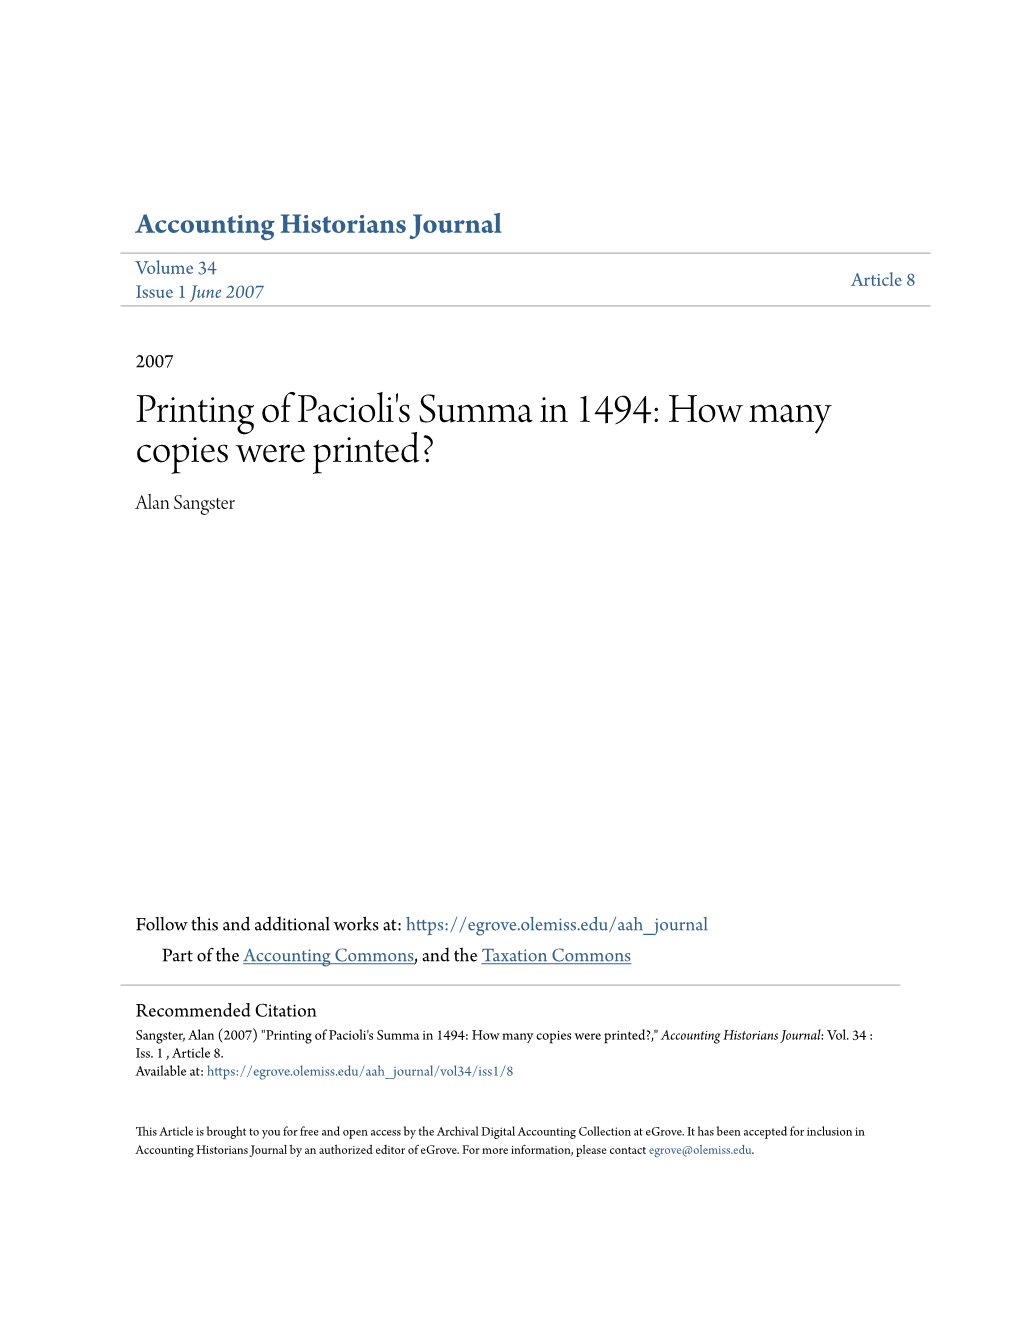 Printing of Pacioli's Summa in 1494: How Many Copies Were Printed? Alan Sangster